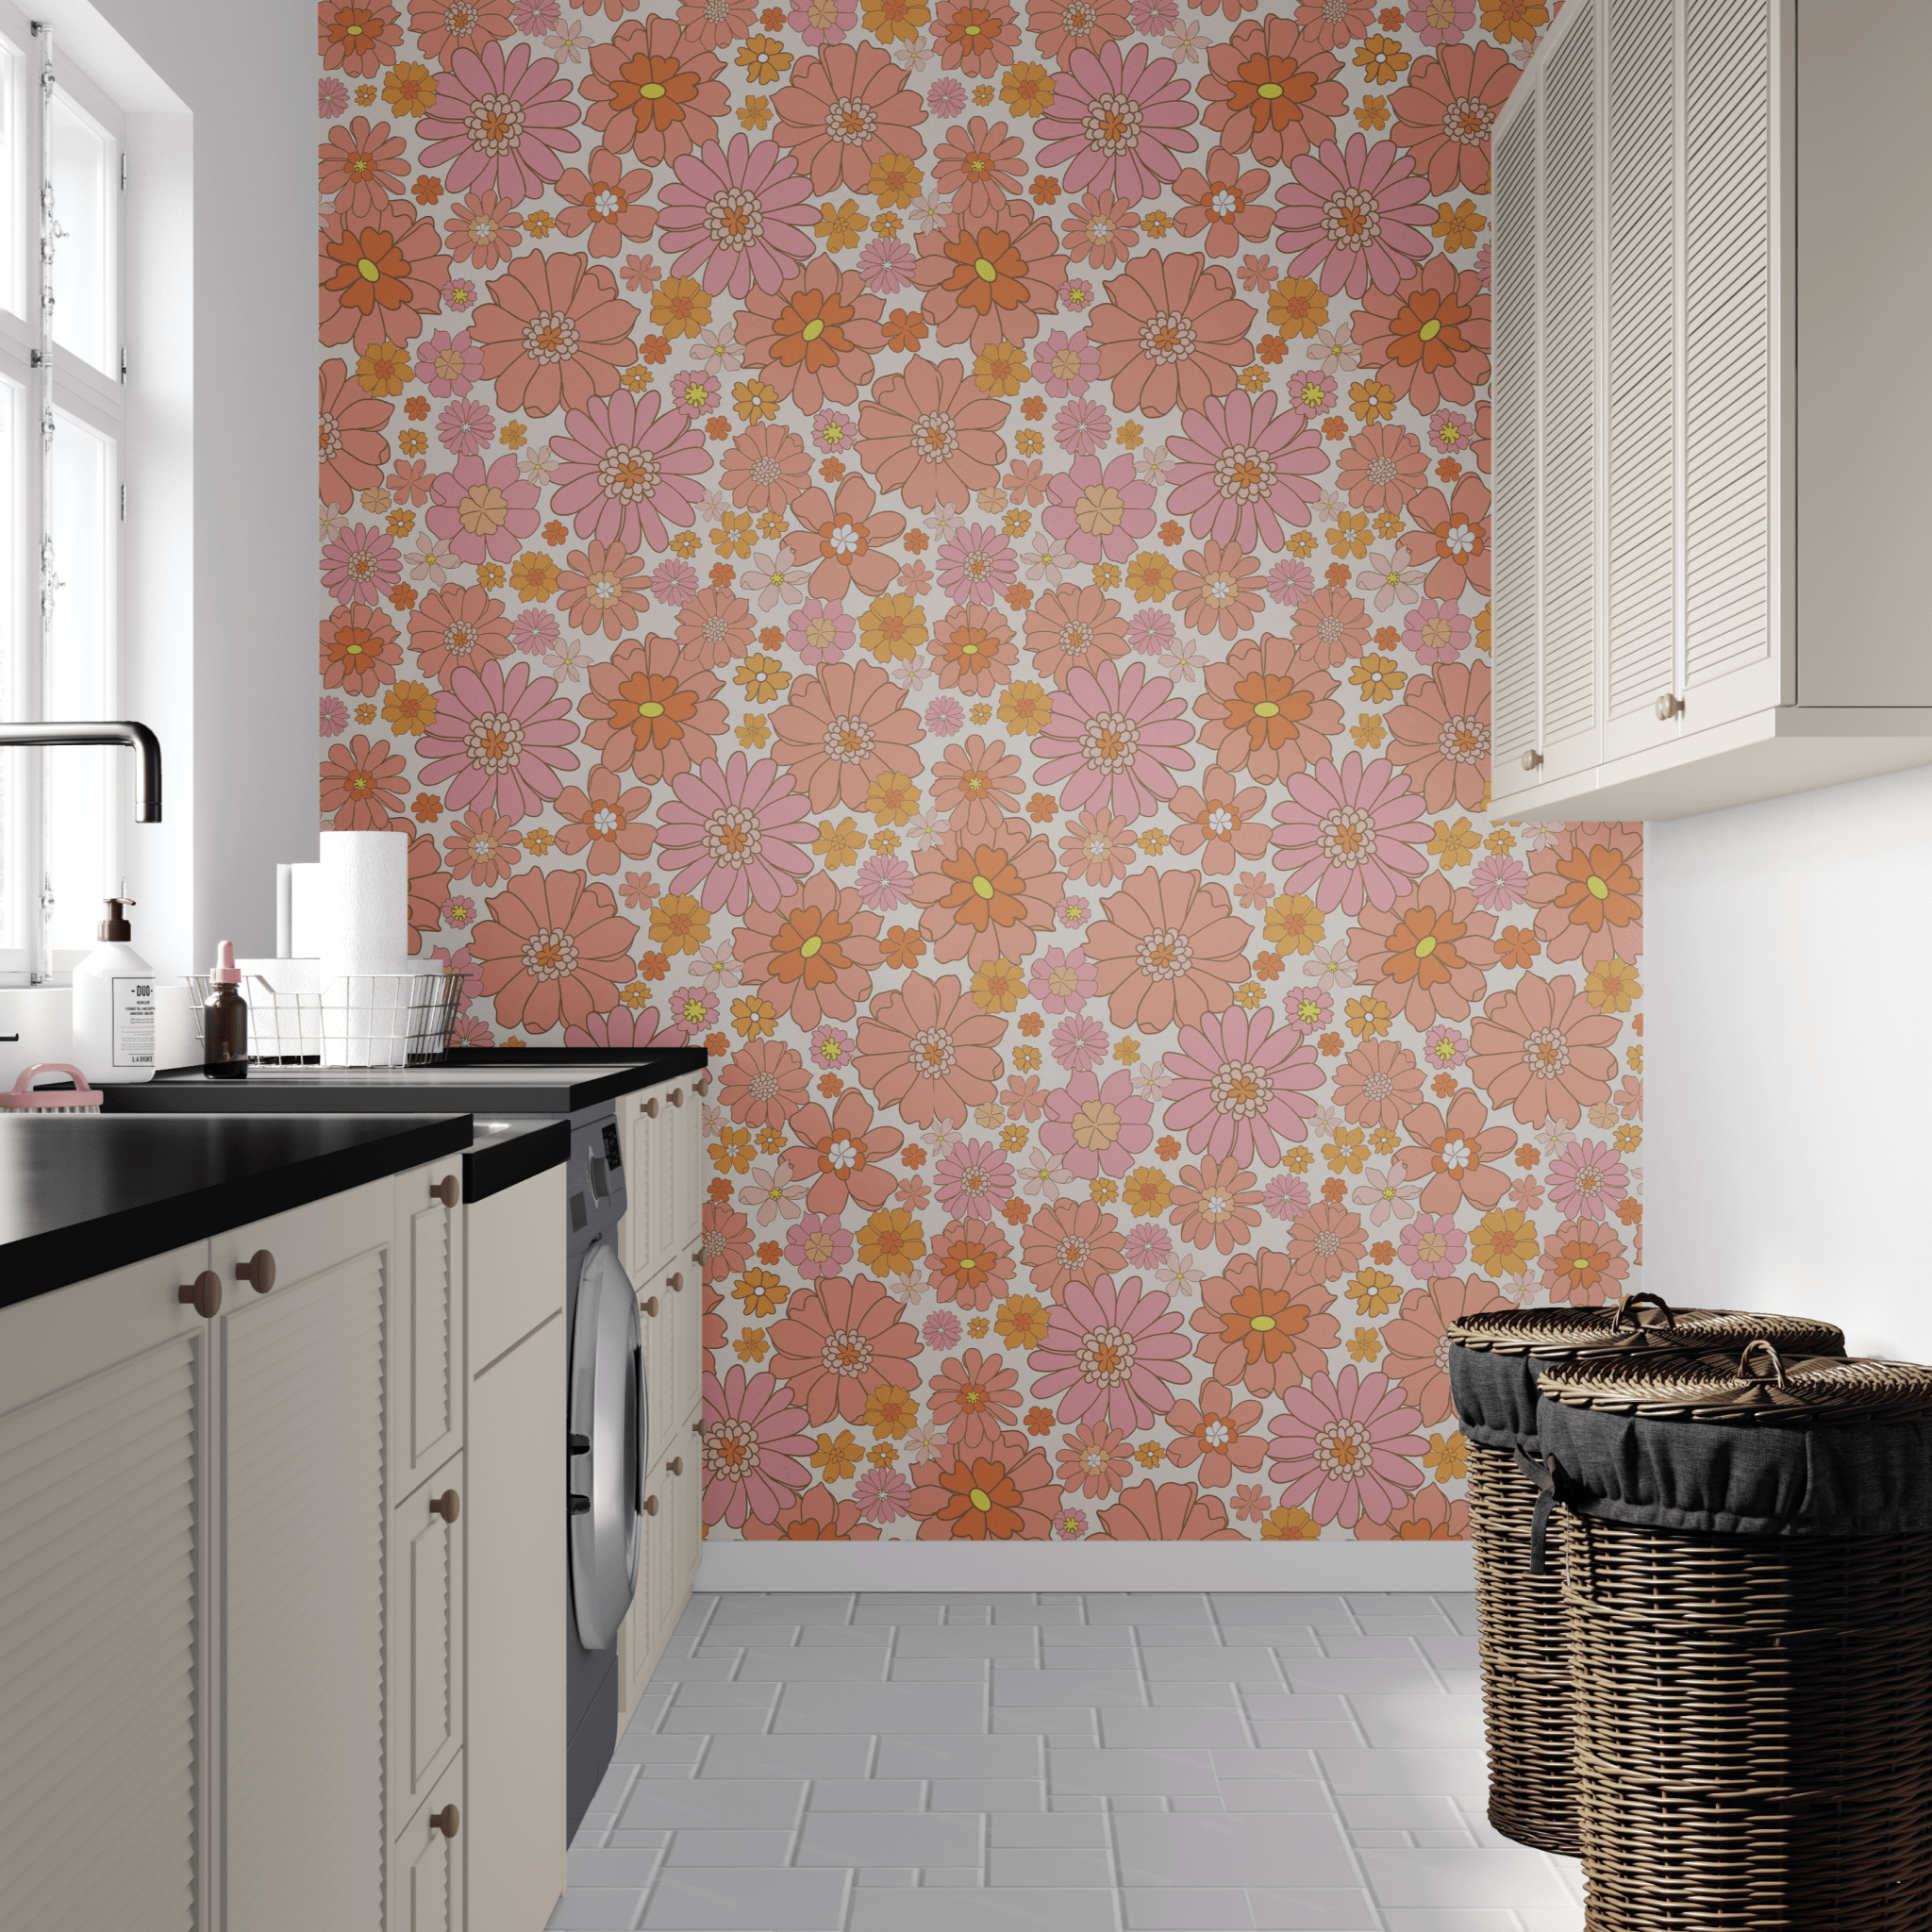 Big Floral Removable Peel and Stick Wallpaper